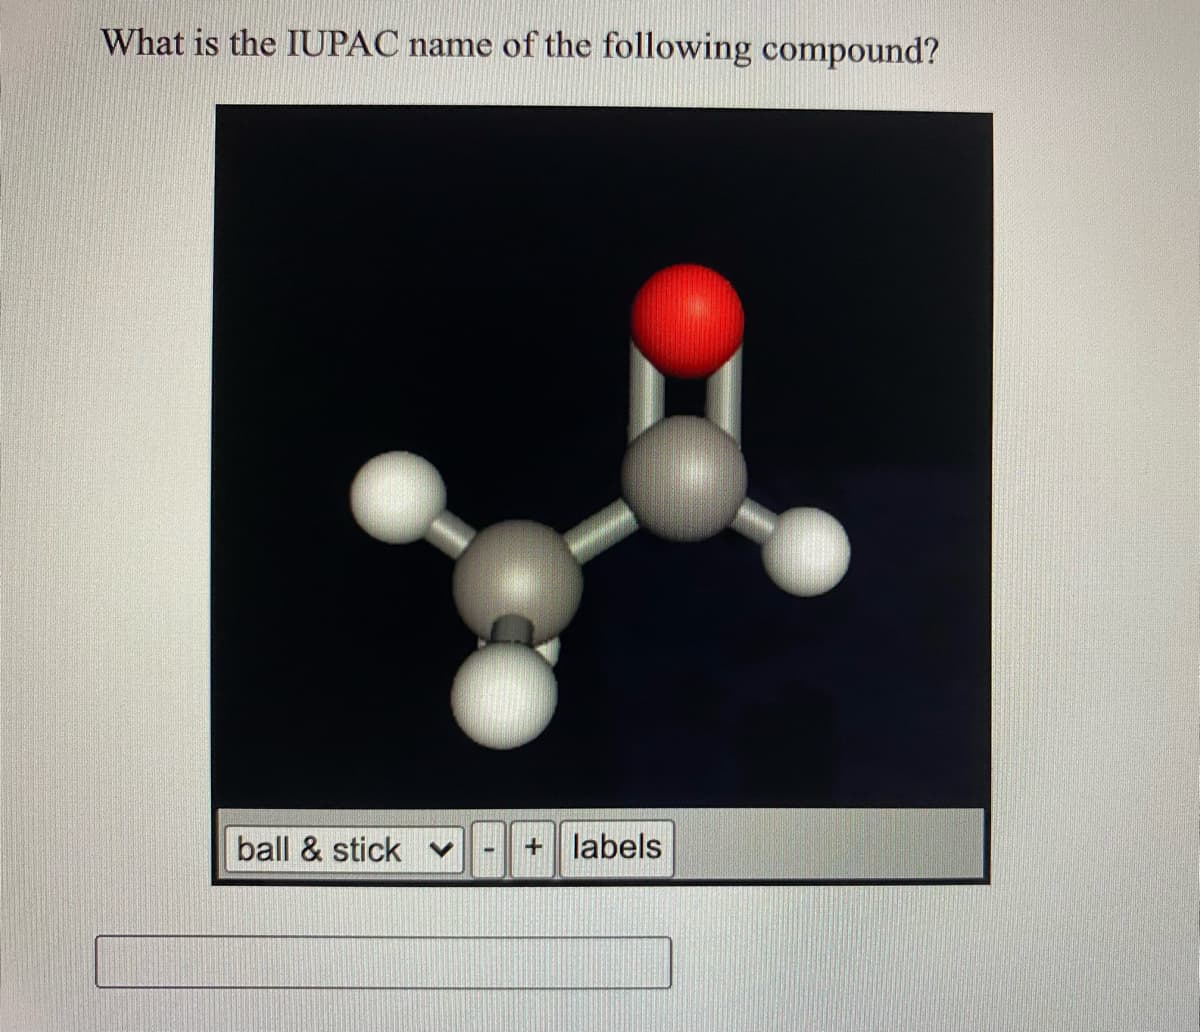 What is the IUPAC name of the following compound?
ball & stick
labels
